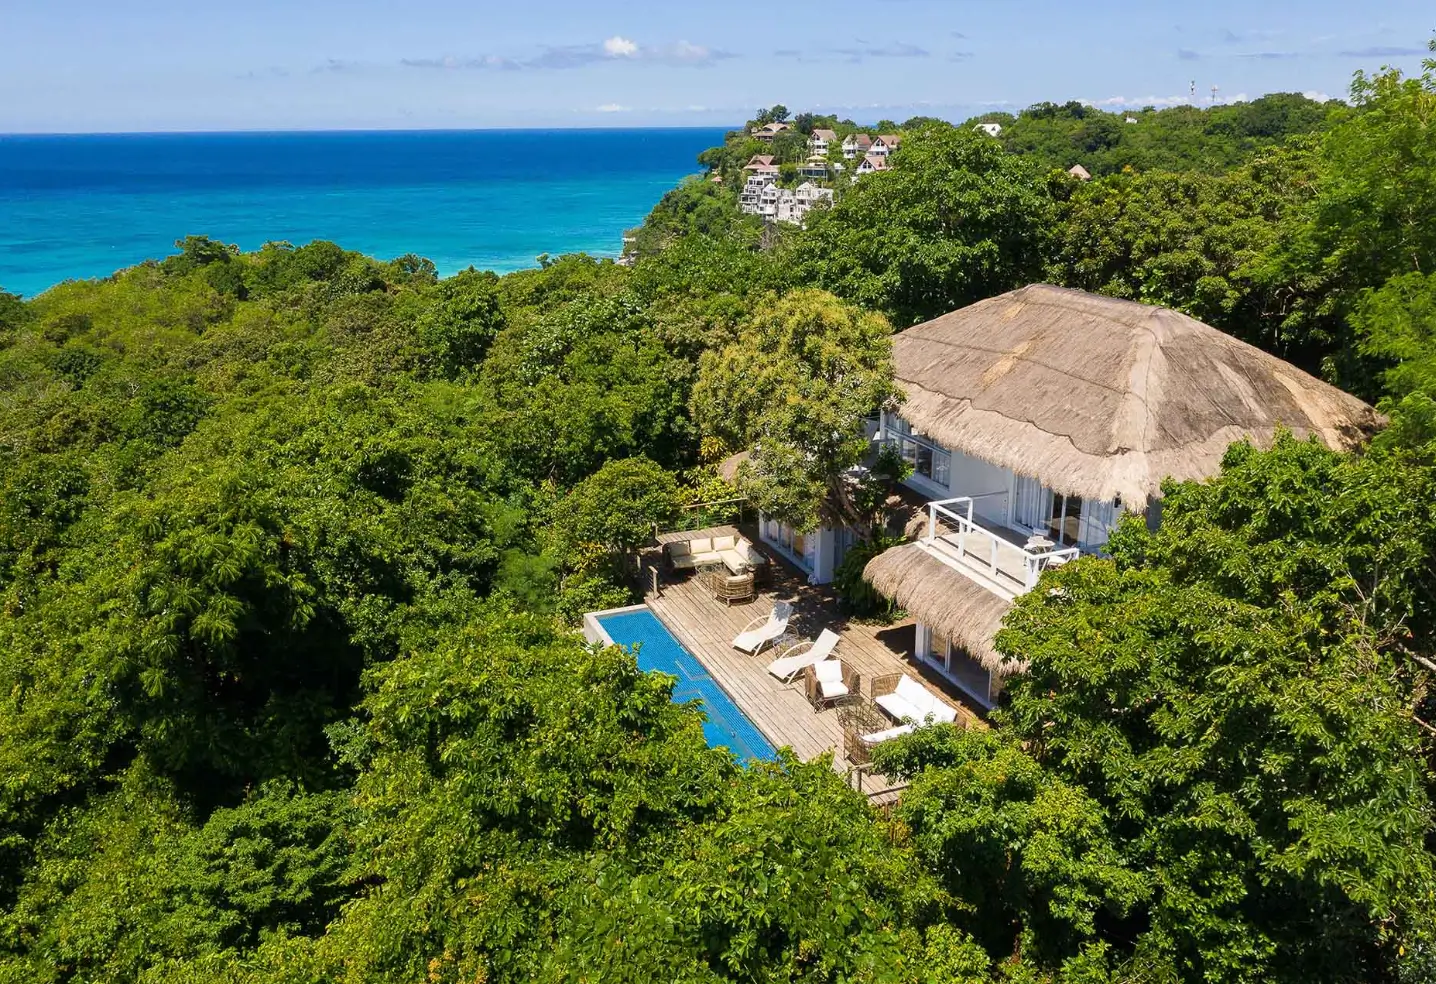 Aerial view of Diniview Villa Resort, a boutique resort in Boracay. The villa, with its thatched roof, is surrounded by dense greenery and has a private pool overlooking the turquoise sea.